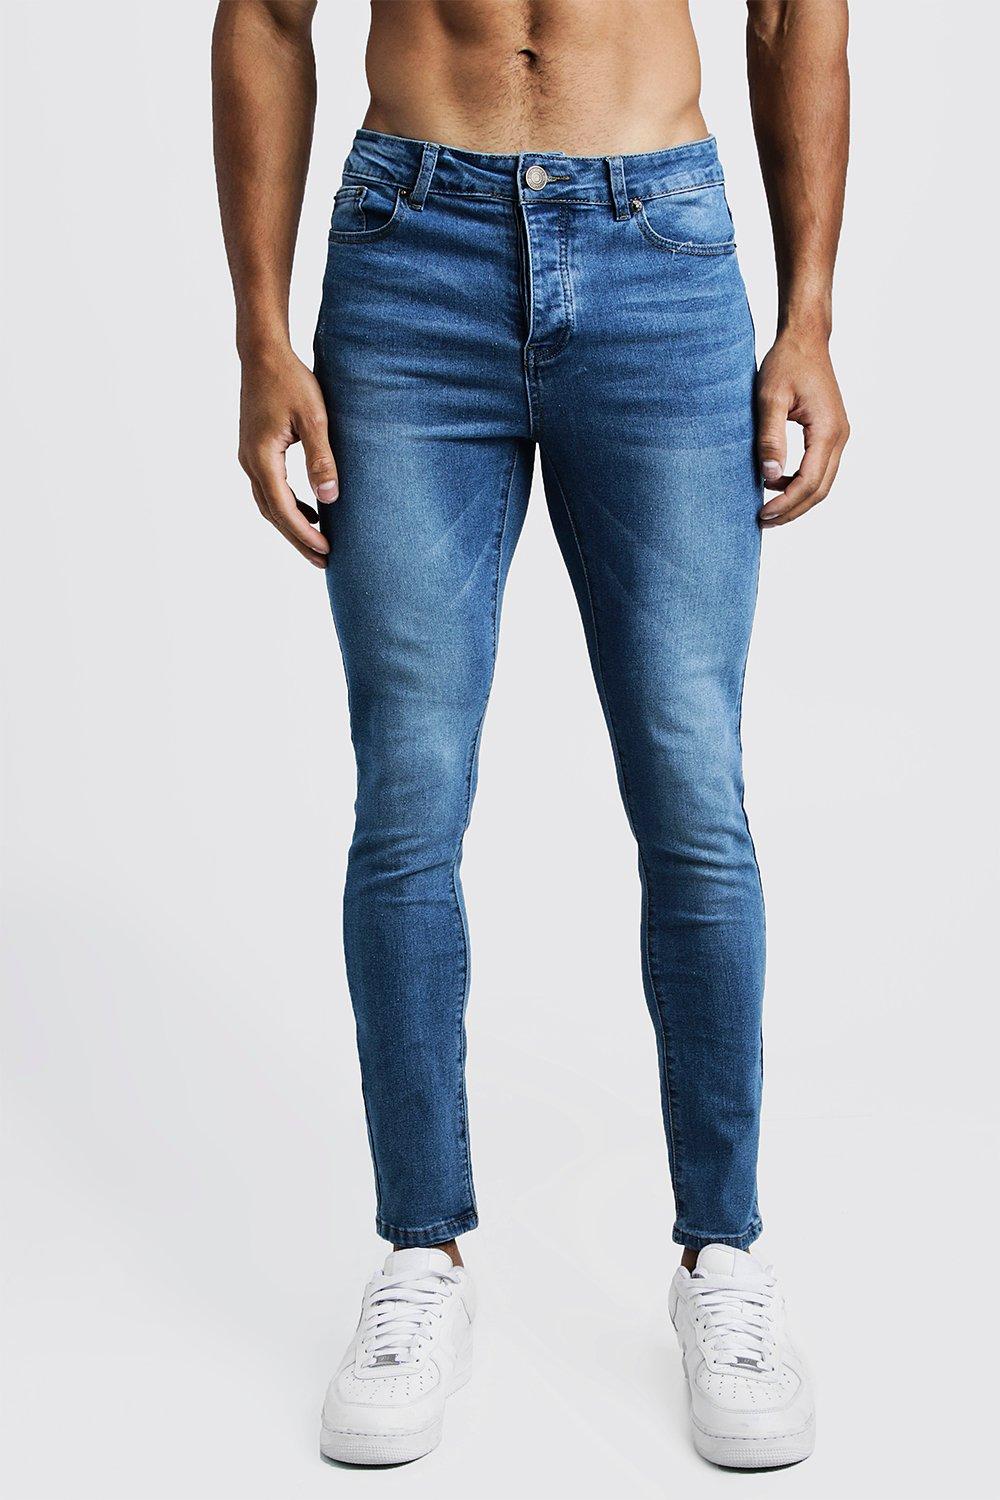 levi's tapered 502